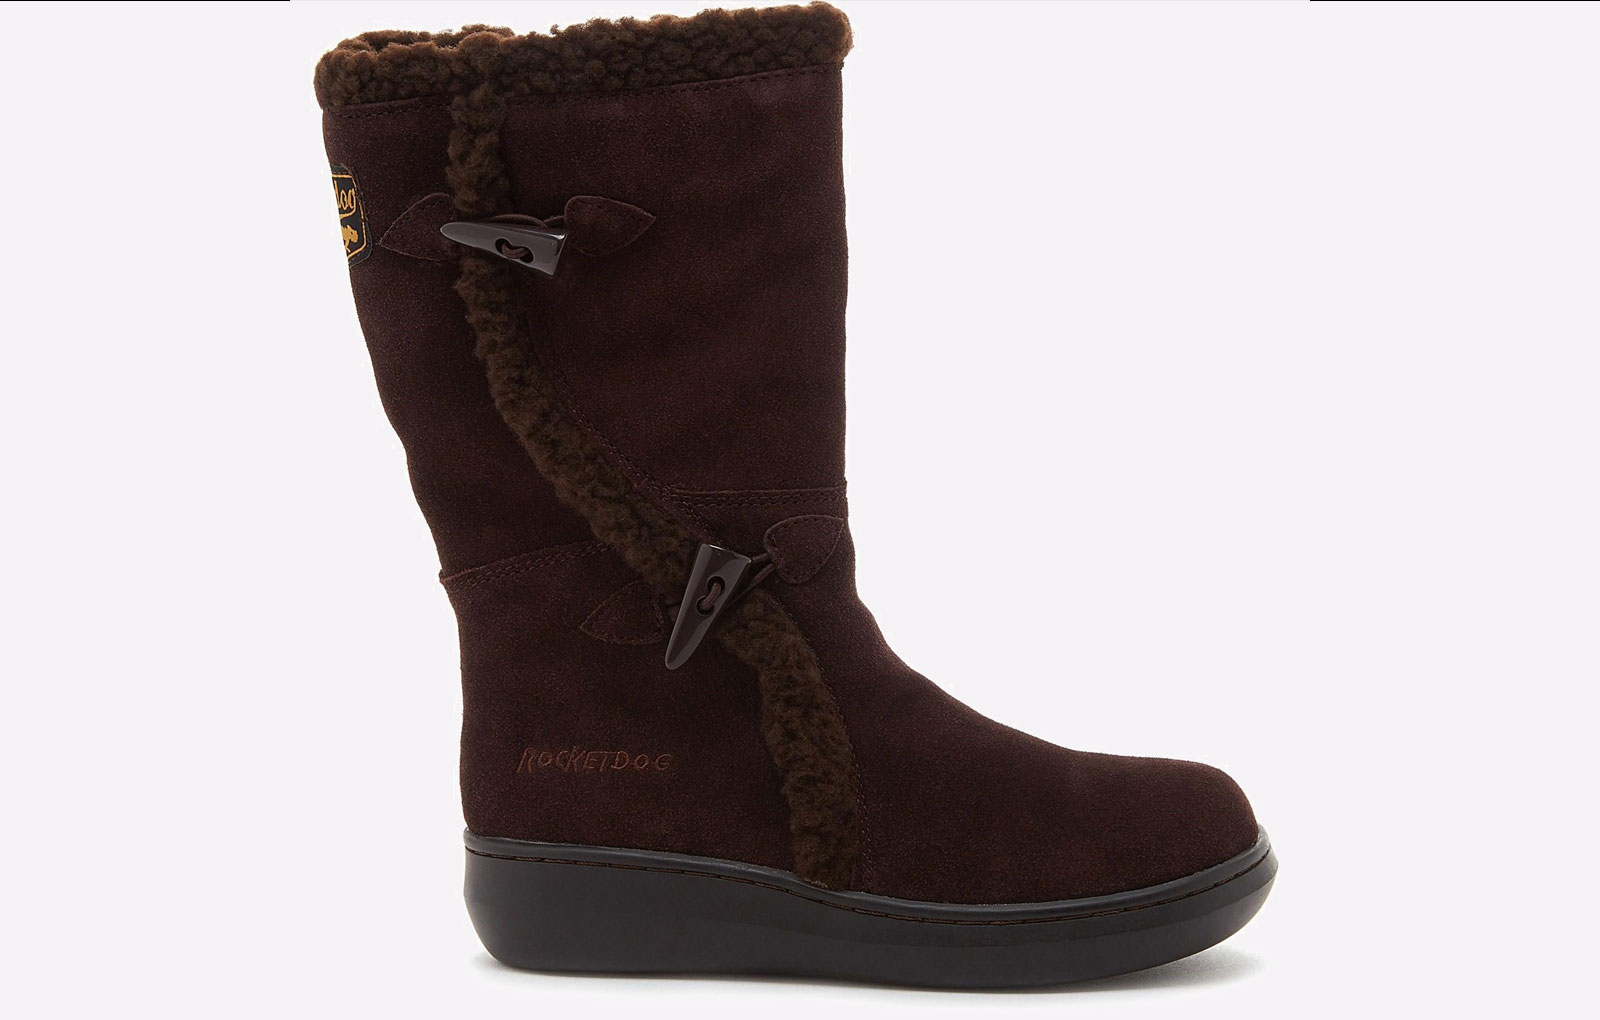 Rocket Dog Slope Mid-Calf Suede Winter Boot Womens - GRD-29581-50159-08